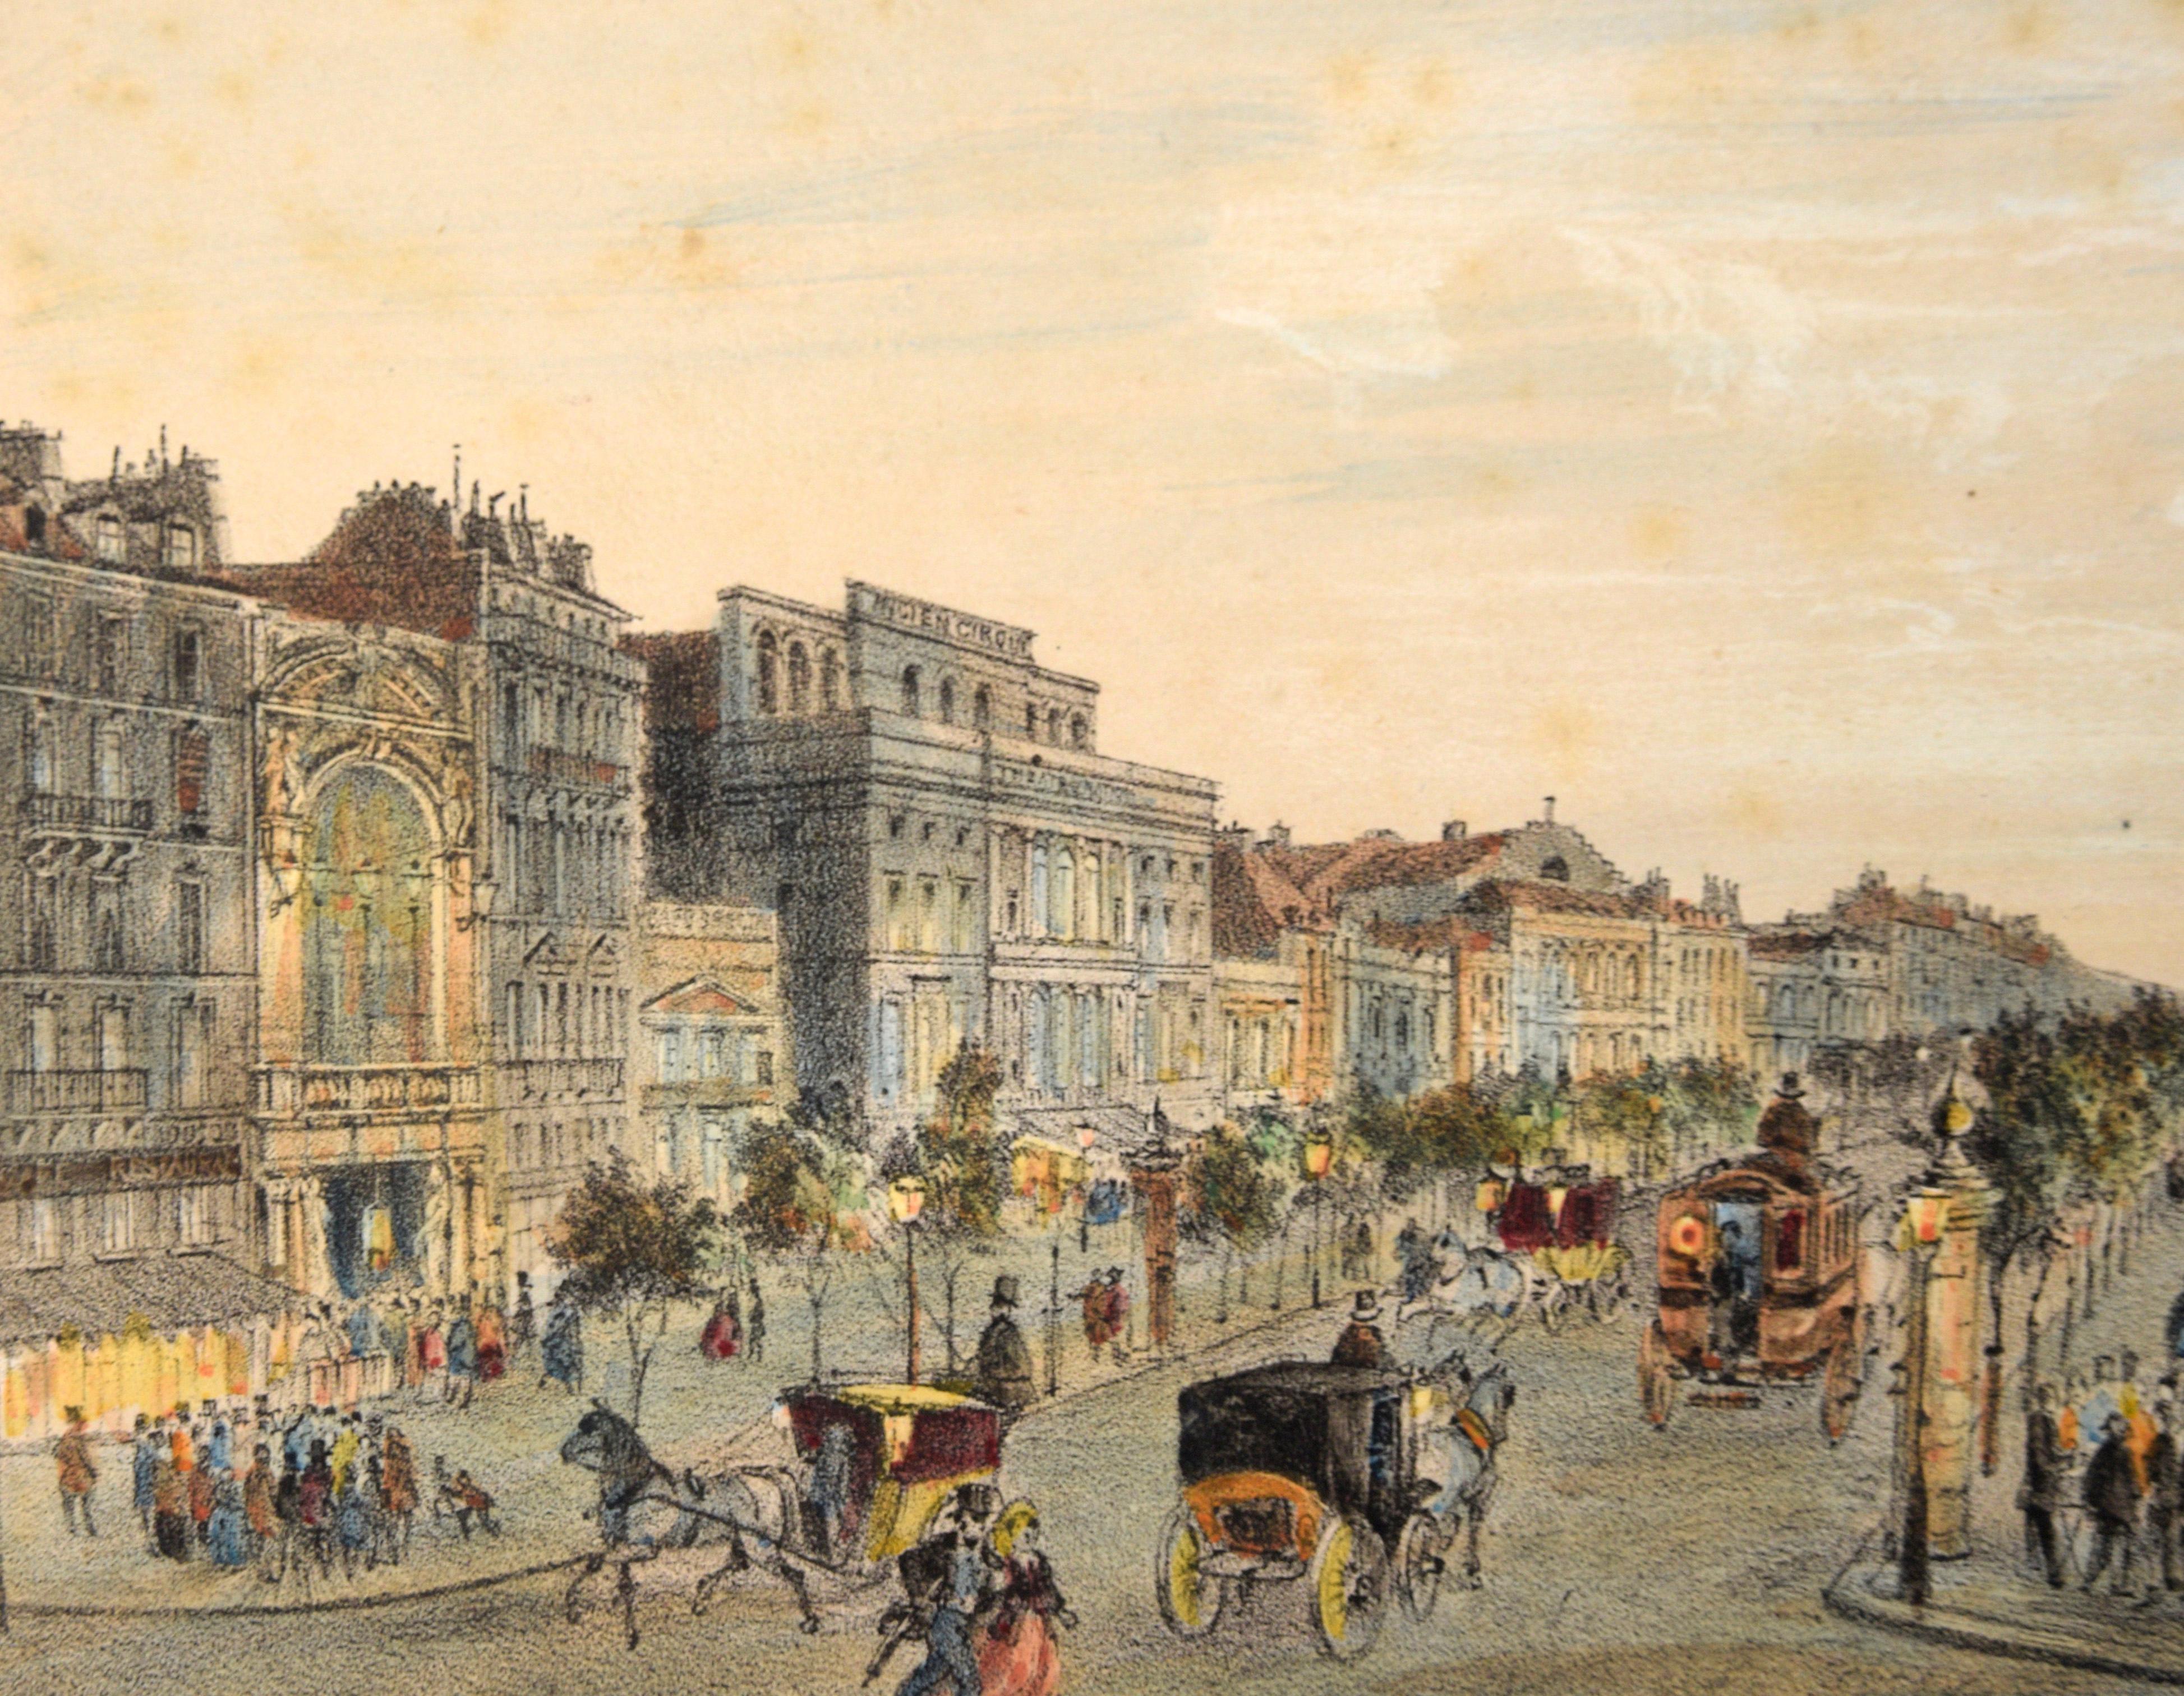 Boulevard du Temple, Paris, France - Hand Colored Lithograph

Detailed lithograph of a Paris street scene by Louis Valentin Emile de La Tramblais (French, 1821-1892). This piece is from a book of similar illustrations entitled 